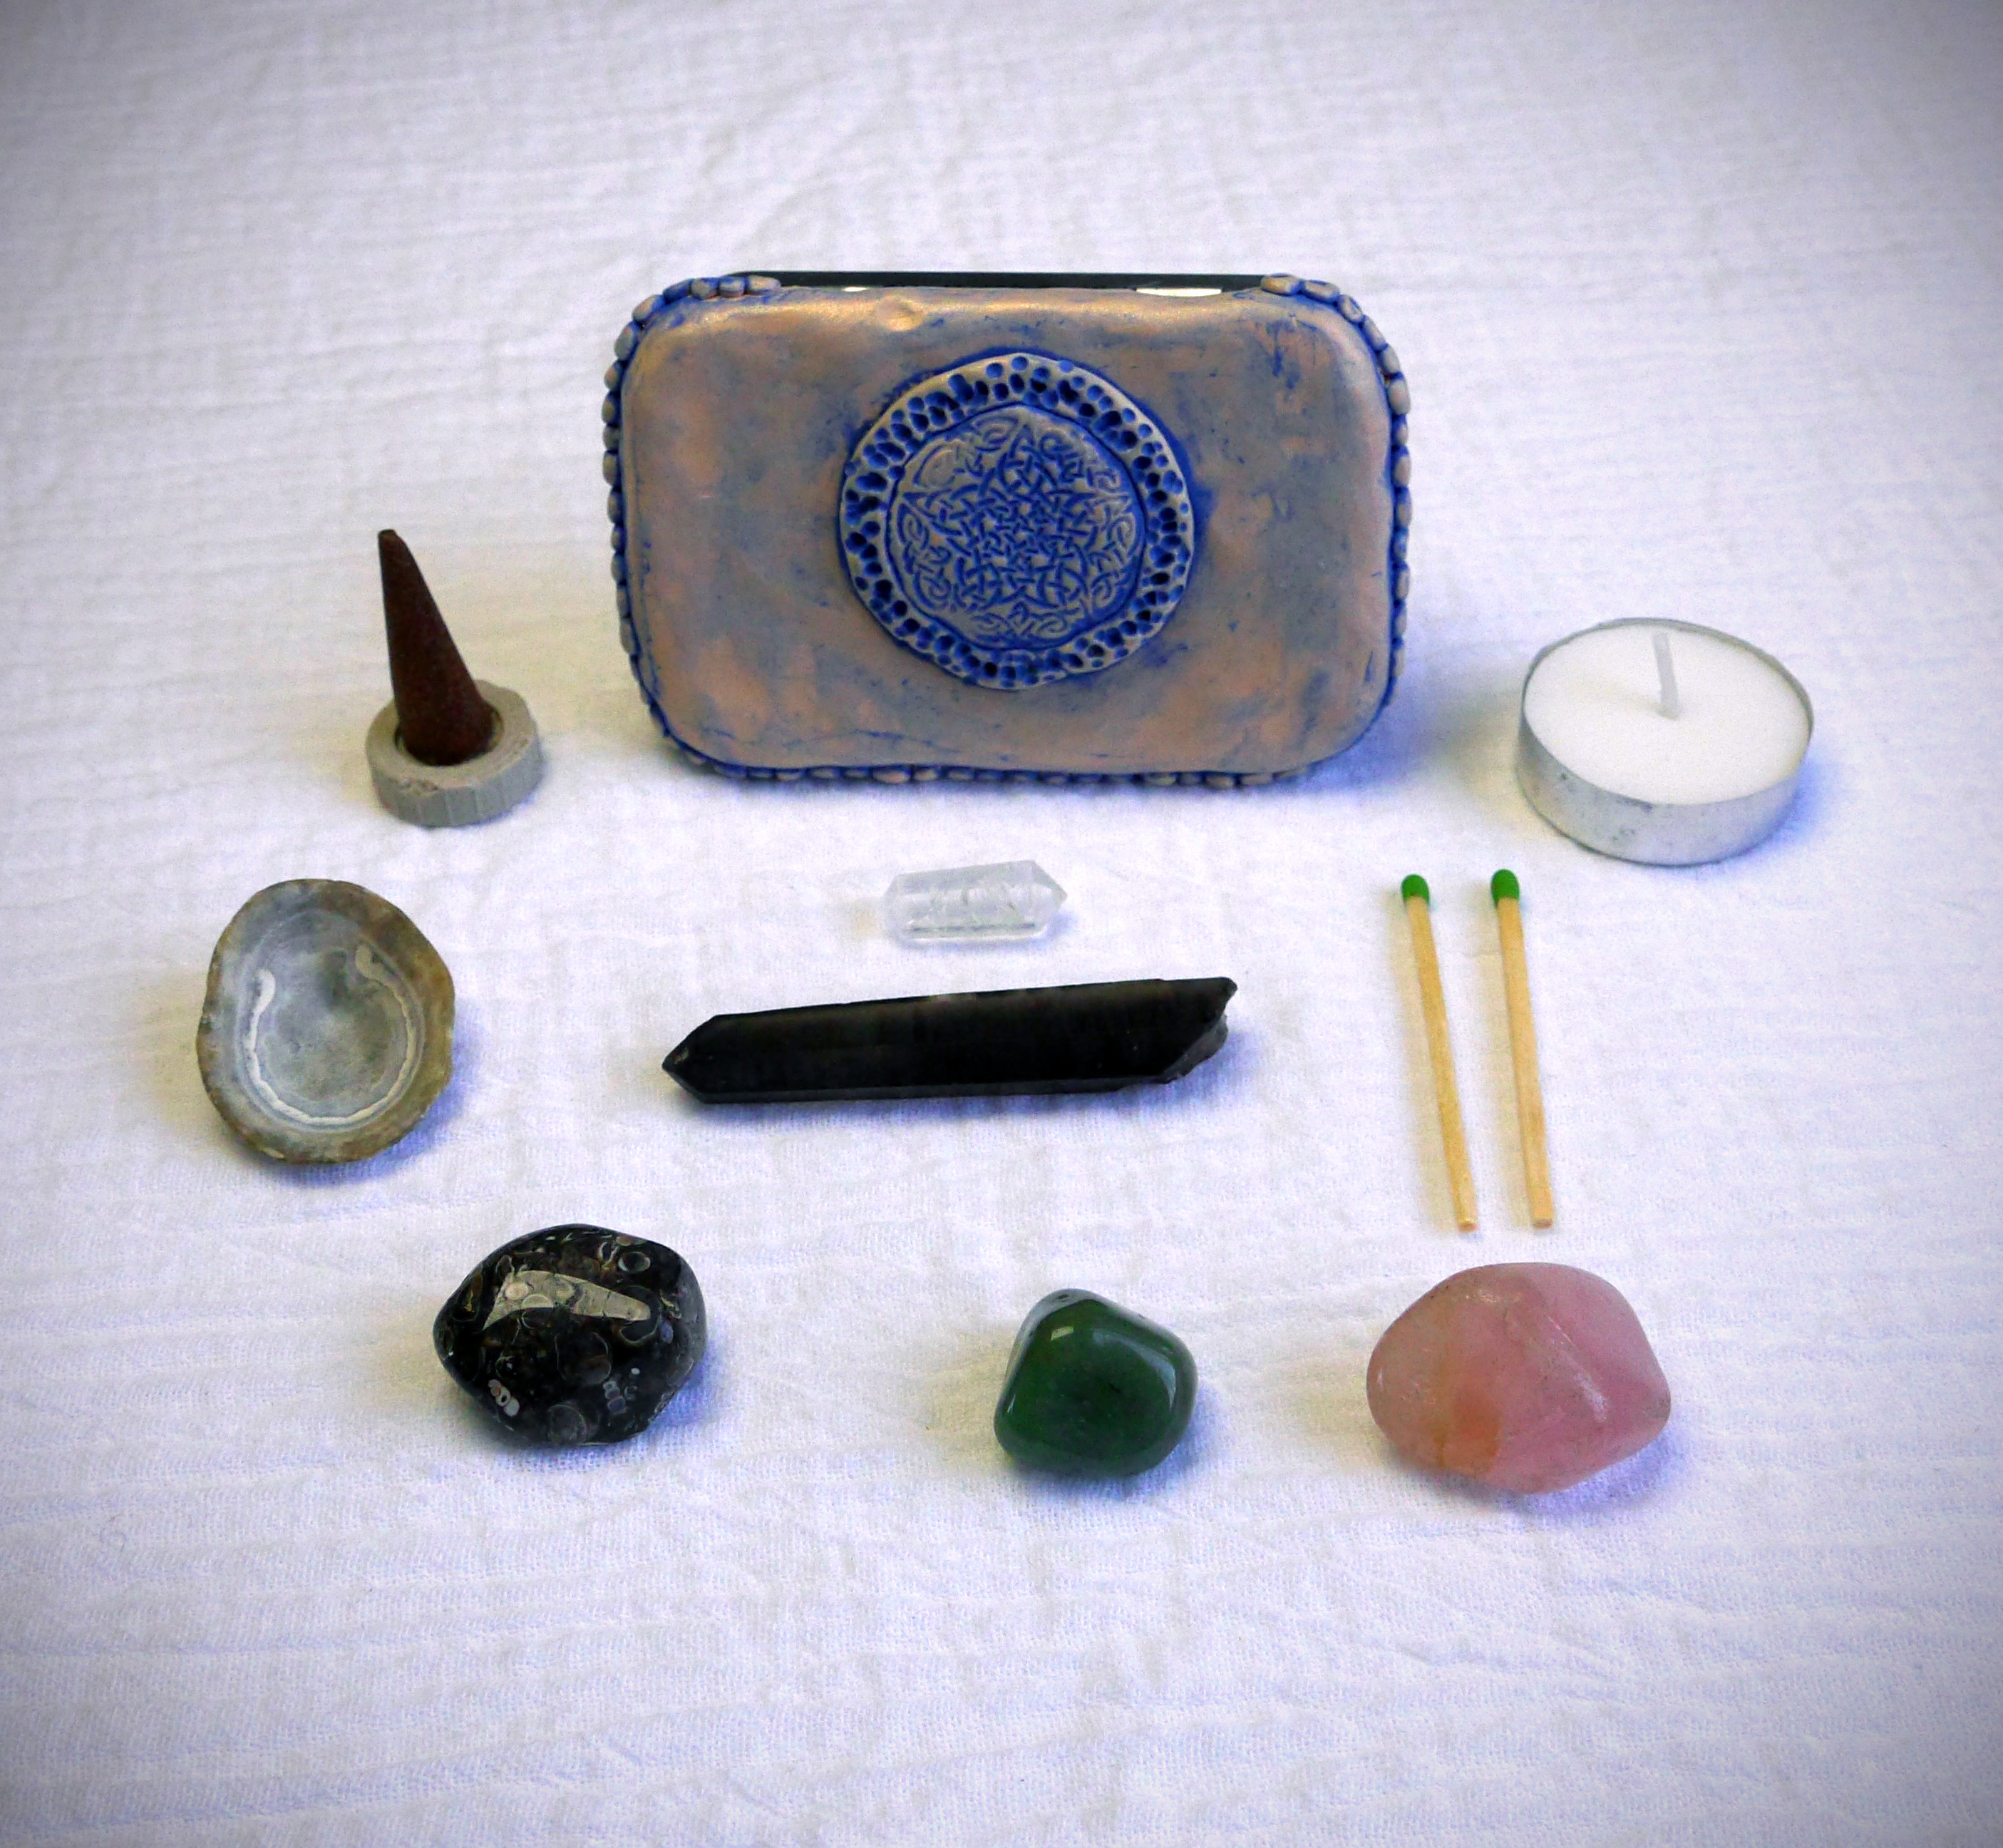 Altoids tin travel altar decorated with polymer clay, with crystals, incense, tea light candles, an offering shell, and matches